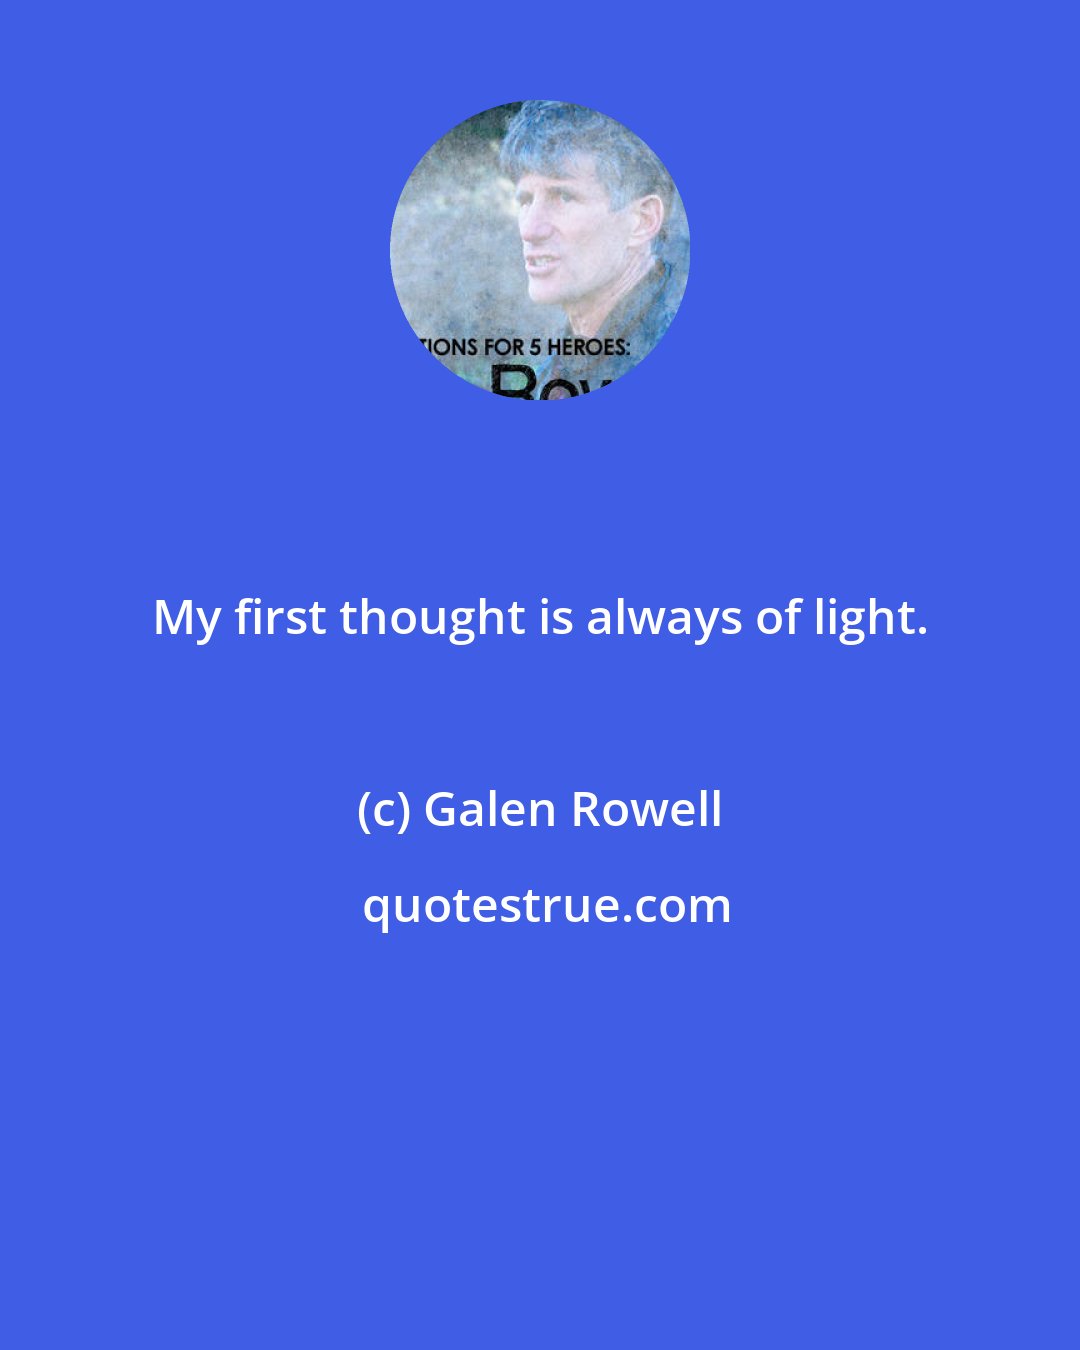 Galen Rowell: My first thought is always of light.